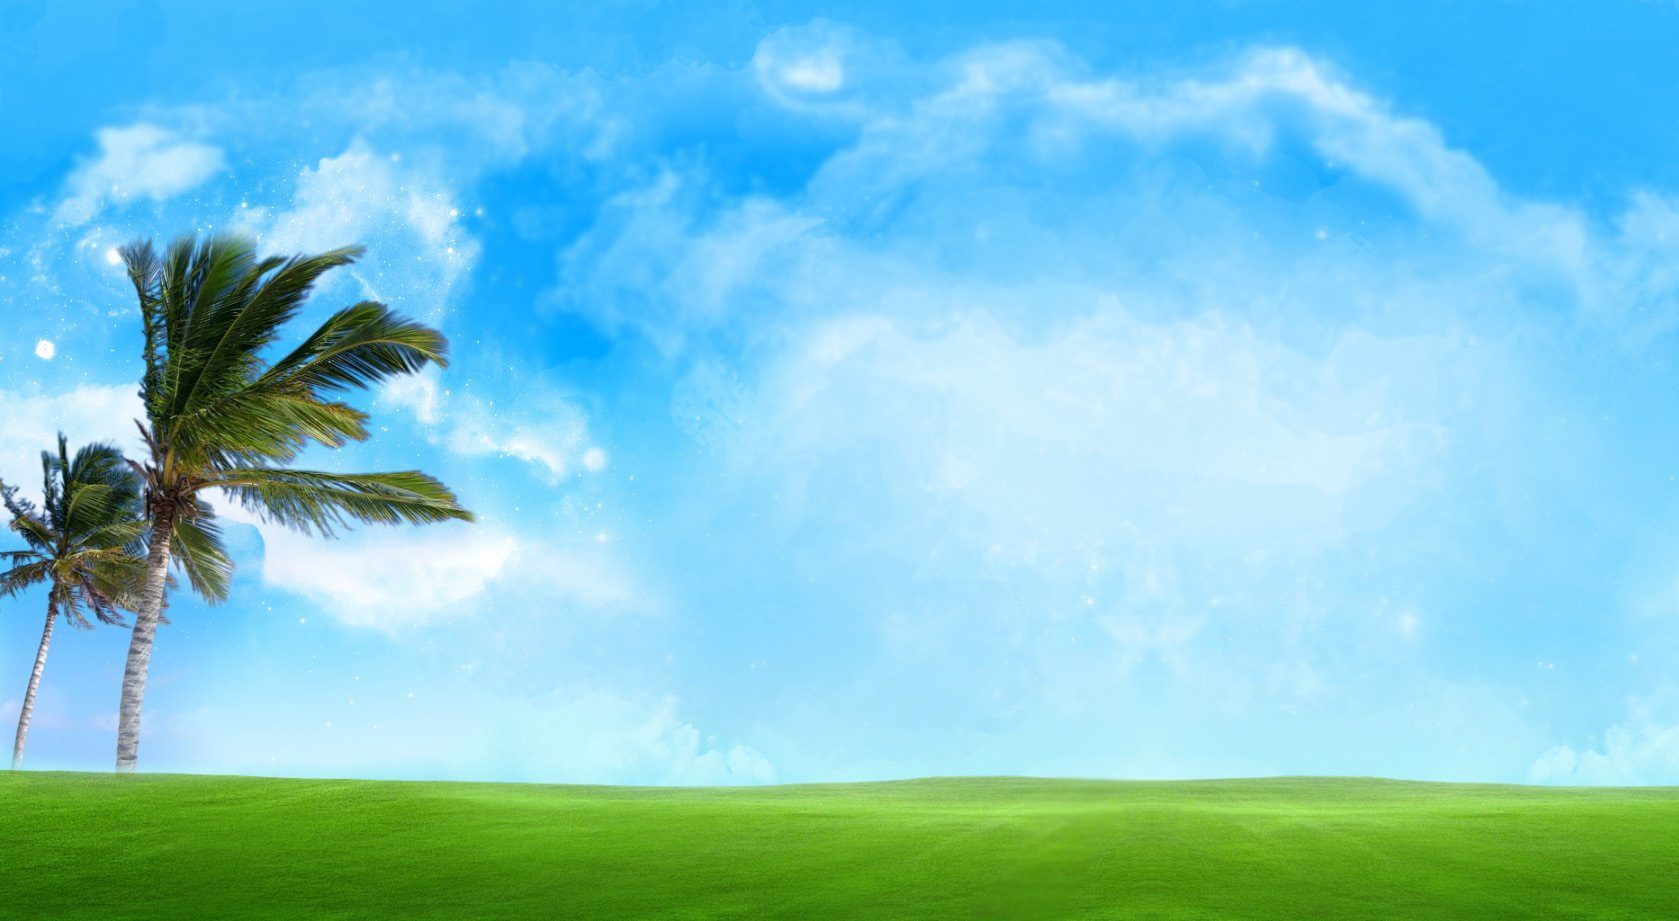 background sky images #23